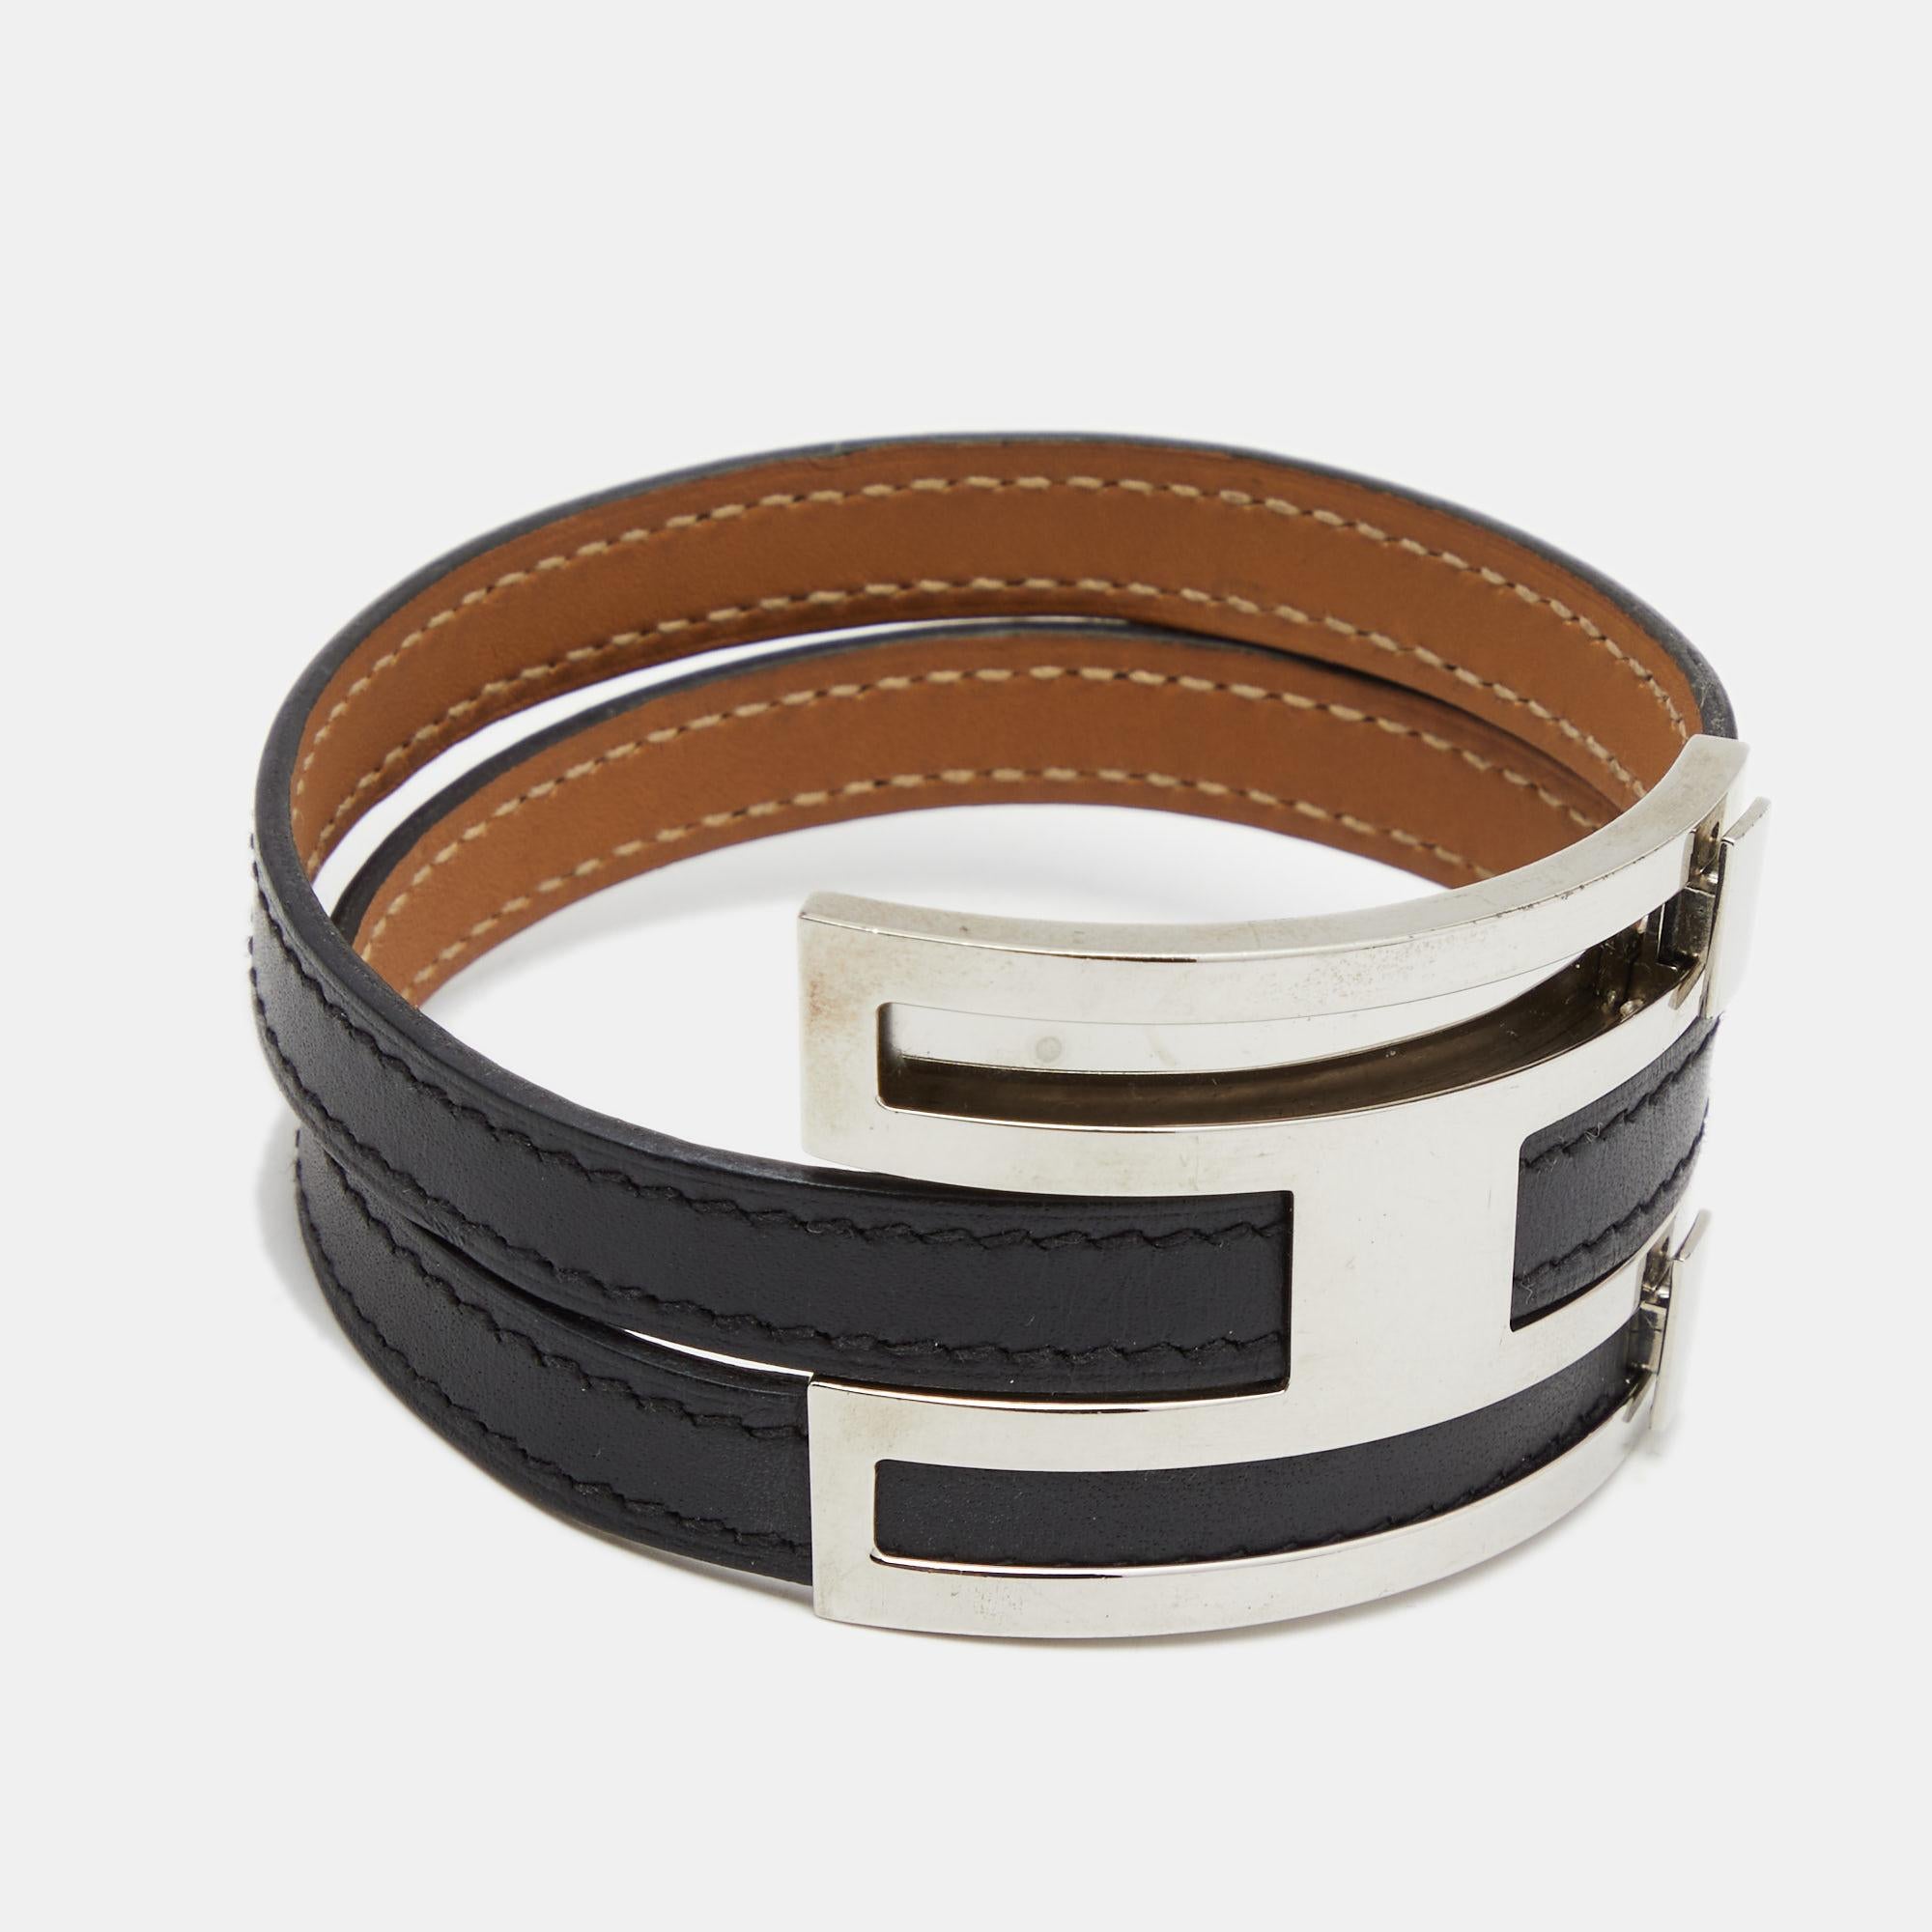 Simplicity and utmost sophistication take center stage in this Pousse Pousse bracelet from Hermès. It comes finely crafted from leather in a lovely black shade and adorned with an 'H' shaped buckle in palladium-plated metal. The neat stitching and